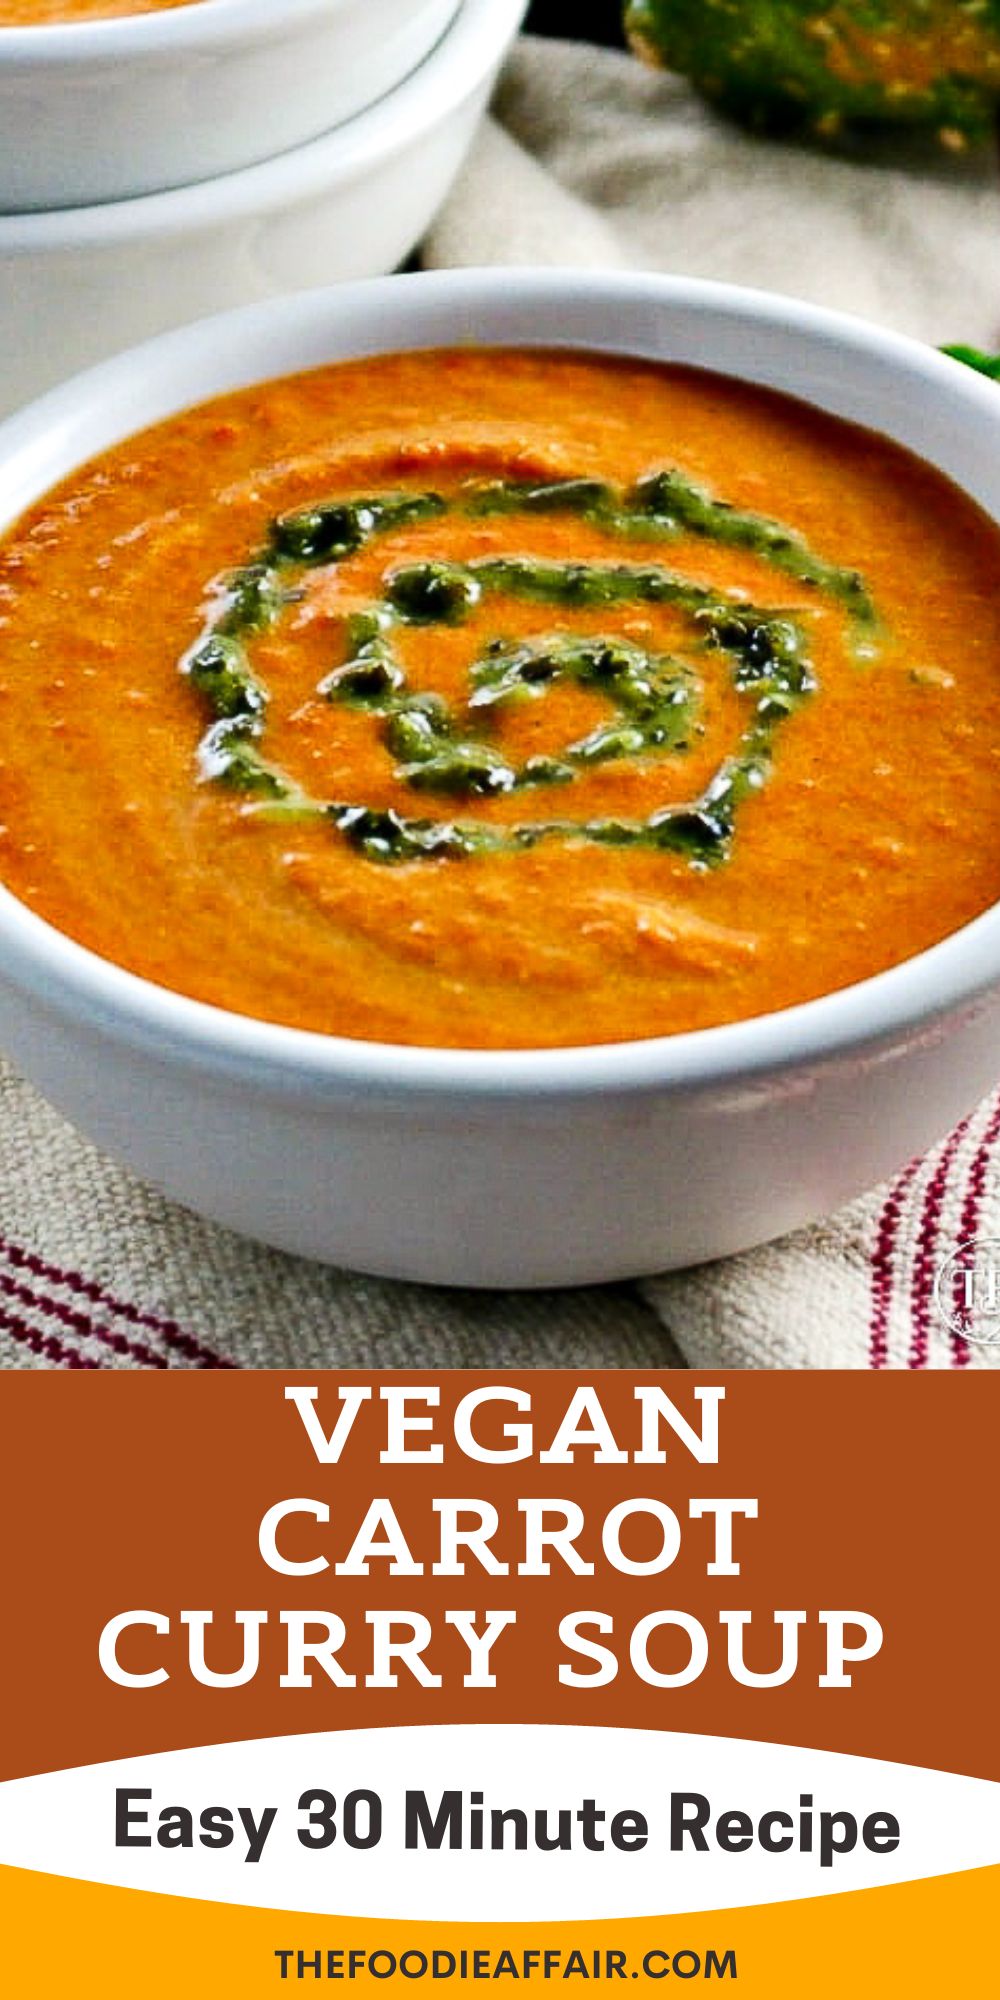 Vegan Carrot Curry Soup Recipe (30 minutes) - The Foodie Affair